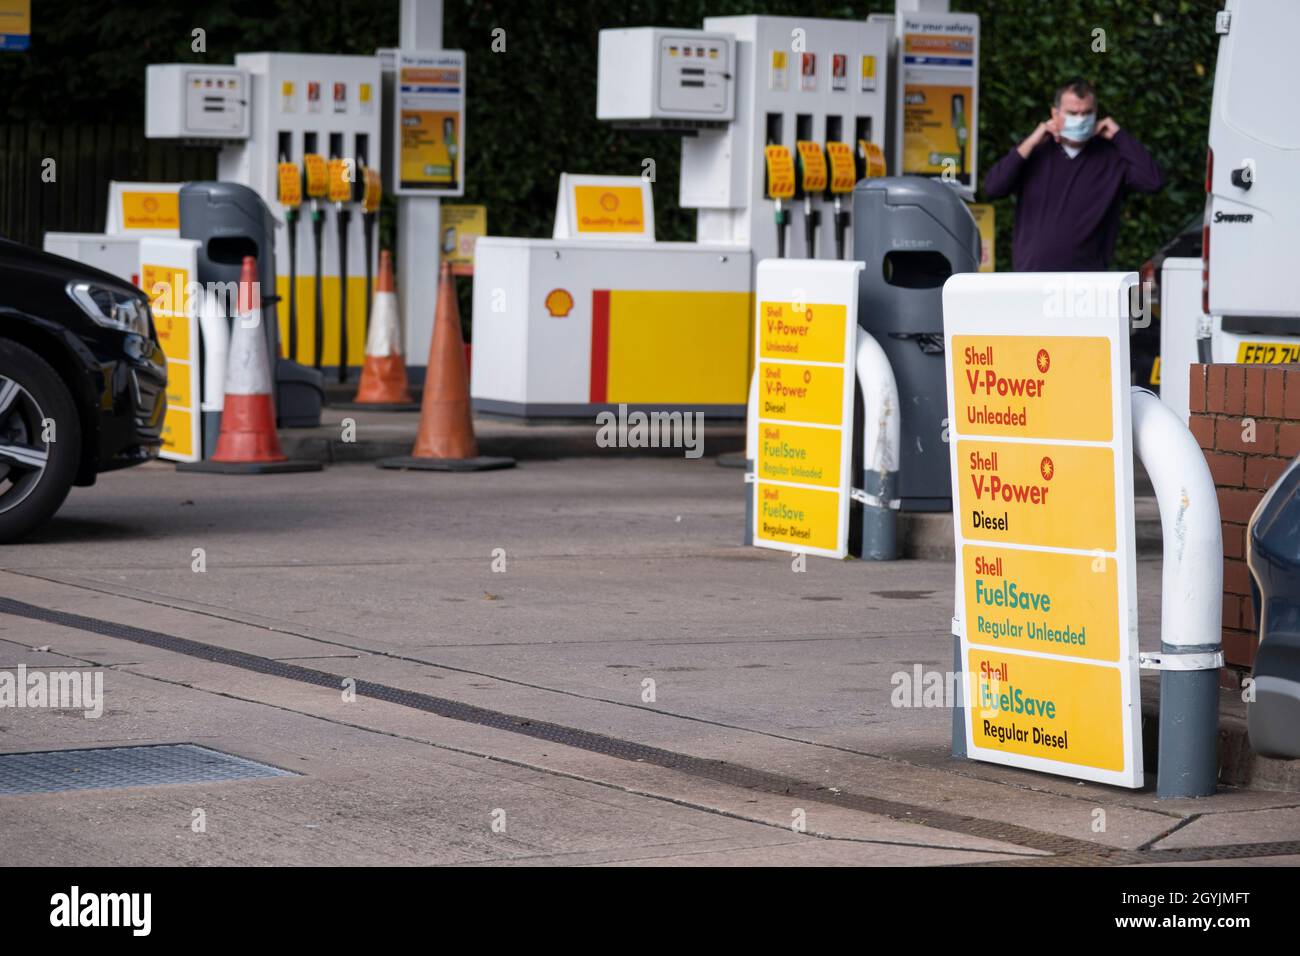 As the fuel crisis in the UK continues, this Shell petrol station is open for business, and motorists drive in with their cars to fill up with fuel, which is being sold at normal prices on 29th September 2021 in Birmingham, United Kingdom. While some forecourts remain closed with little or no fuel, there is confusion amongst the public as to whether they should buy fuel now or wait. This has led to panic buying and long queues outside some petrol stations as the crisis, which has been caused by a lack of HGV drivers available to deliver supplies, continues. Stock Photo